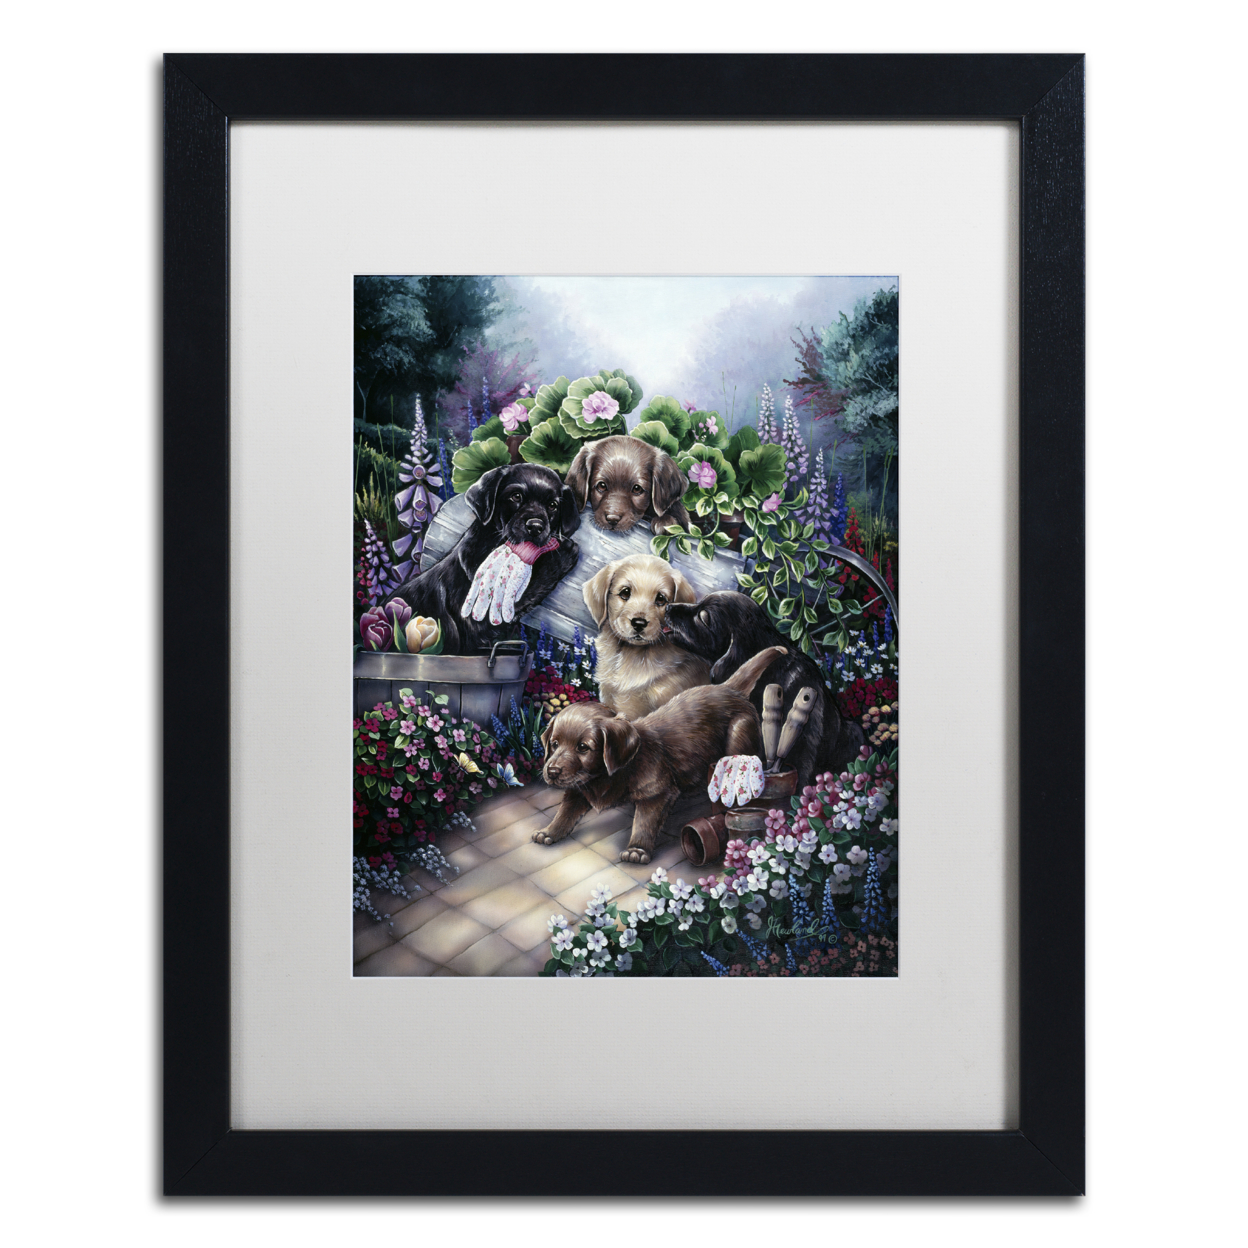 Jenny Newland 'Gardening Puppies' Black Wooden Framed Art 18 X 22 Inches